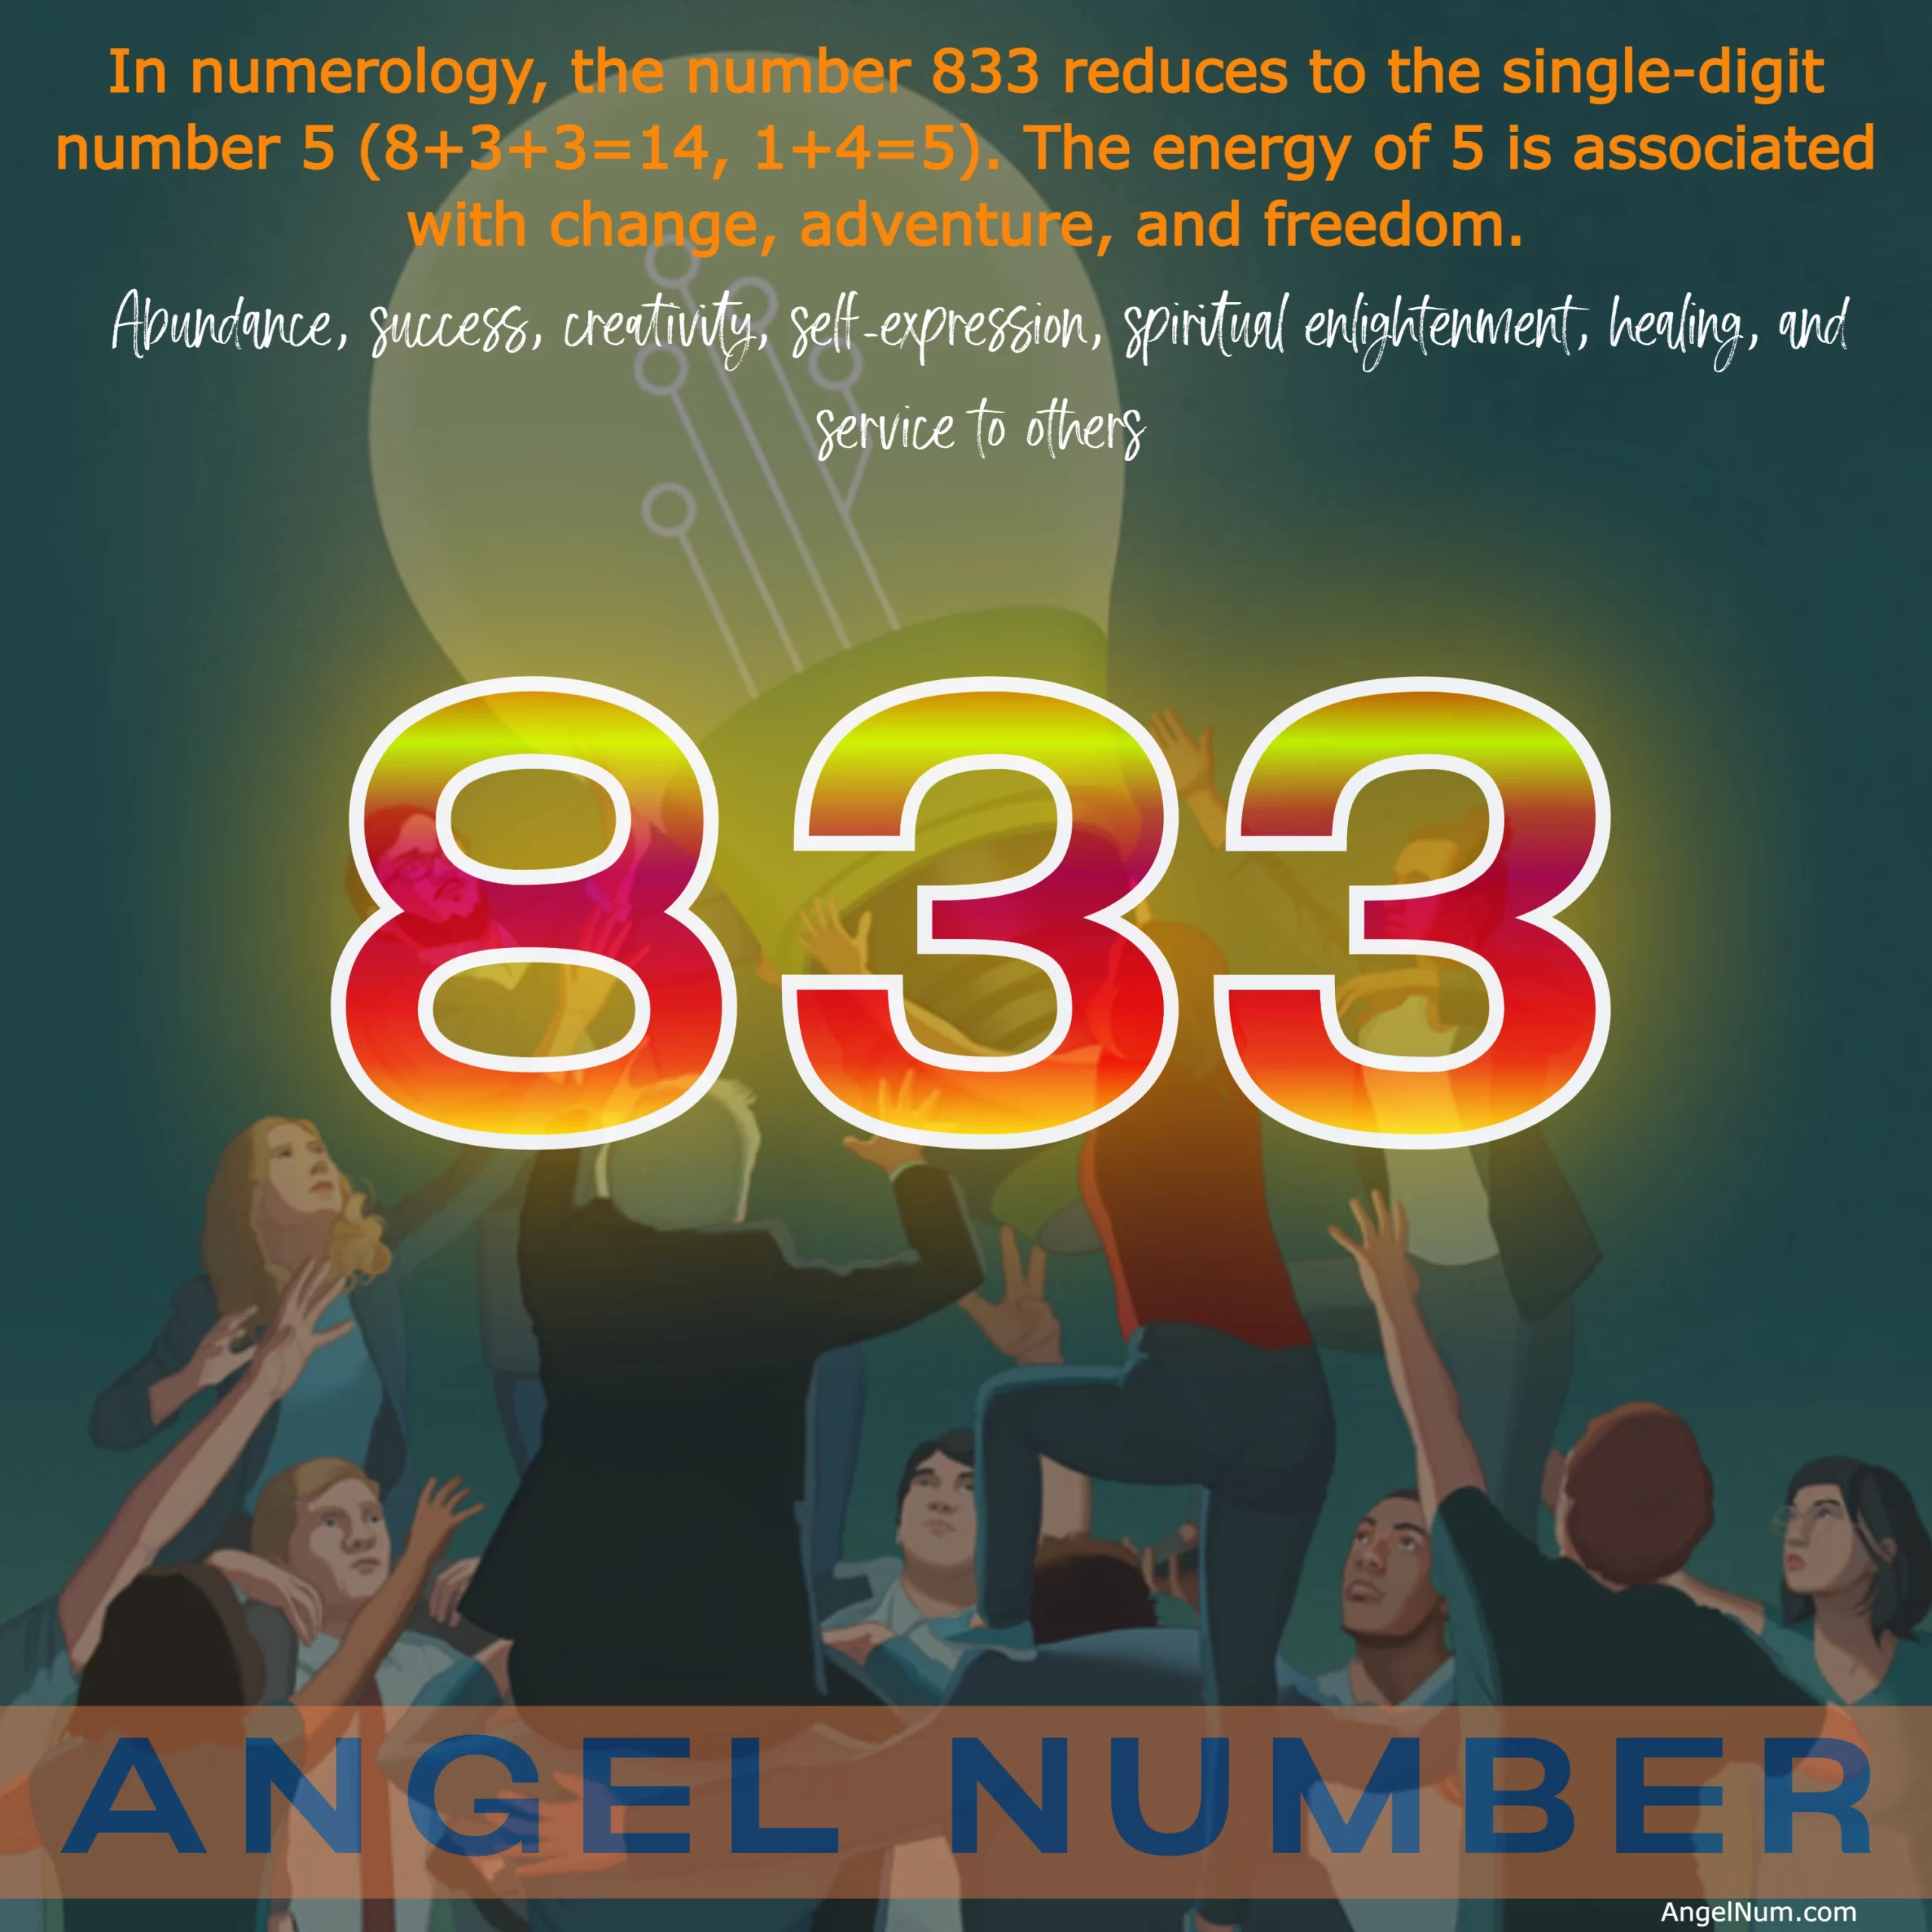 Discover the Meaning and Significance of Angel Number 833